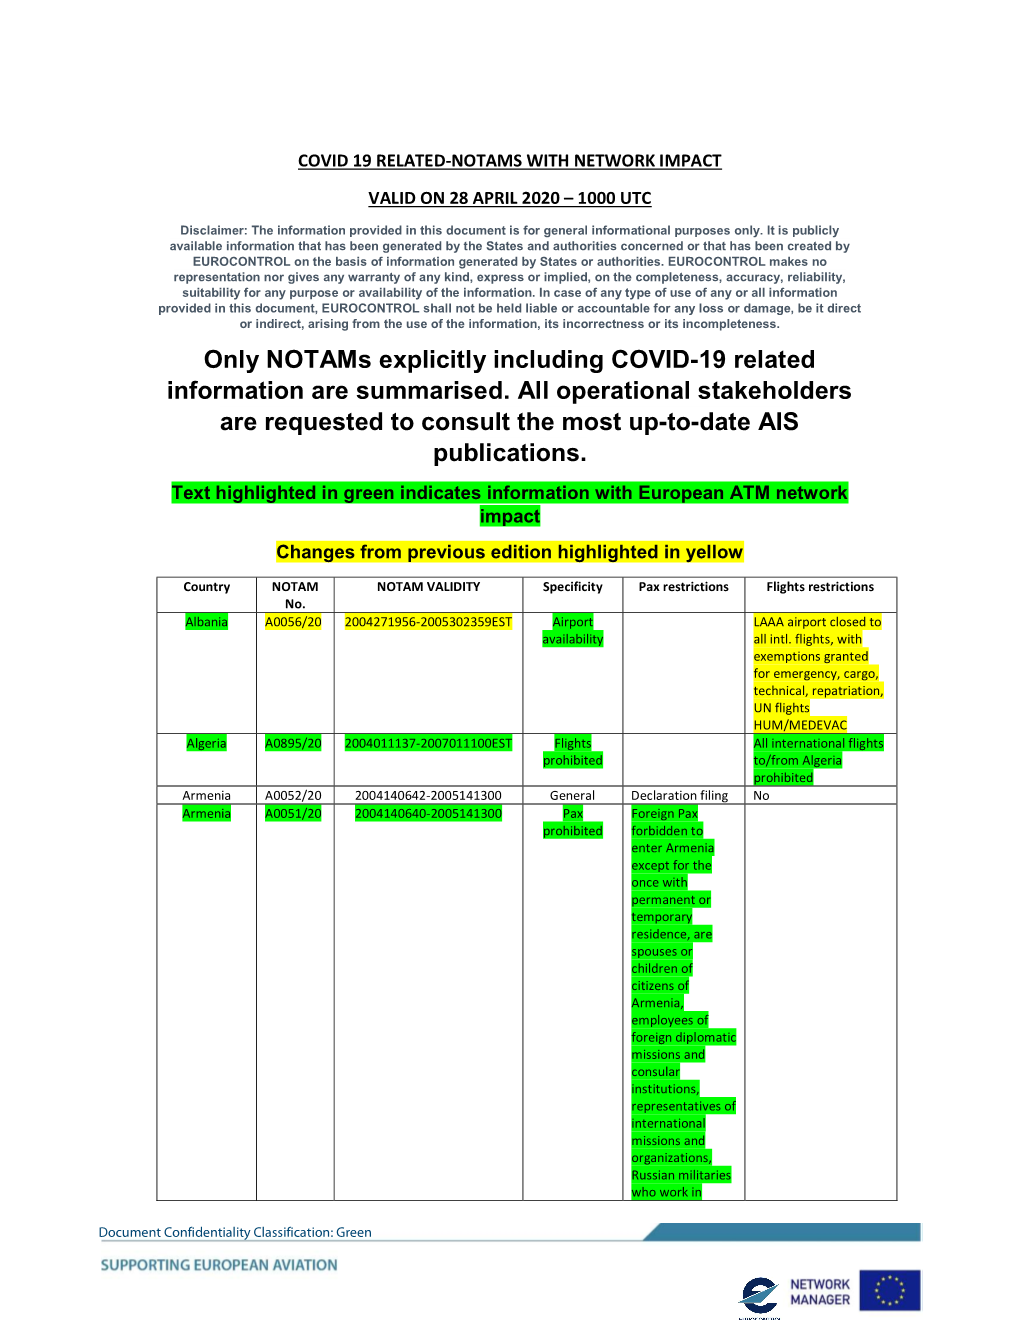 Only Notams Explicitly Including COVID-19 Related Information Are Summarised